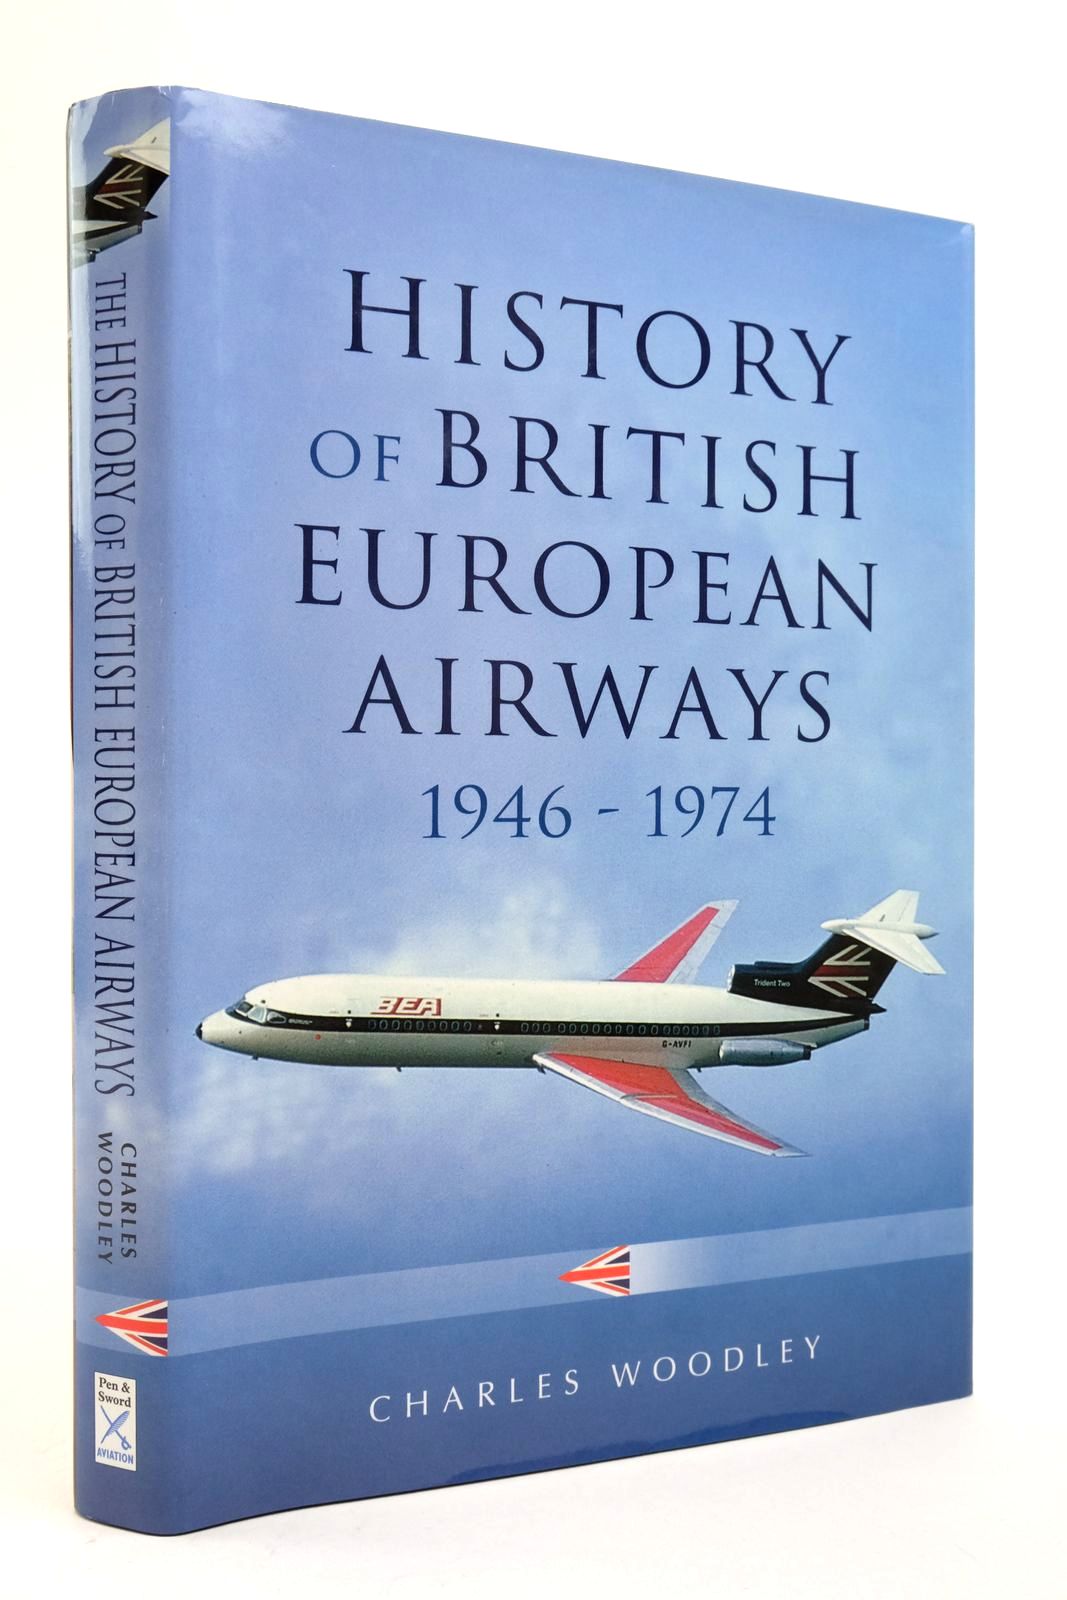 Photo of THE HISTORY OF BRITISH EUROPEAN AIRWAYS 1946 - 1974 written by Woodley, Charles published by Pen &amp; Sword Aviation (STOCK CODE: 2138481)  for sale by Stella & Rose's Books